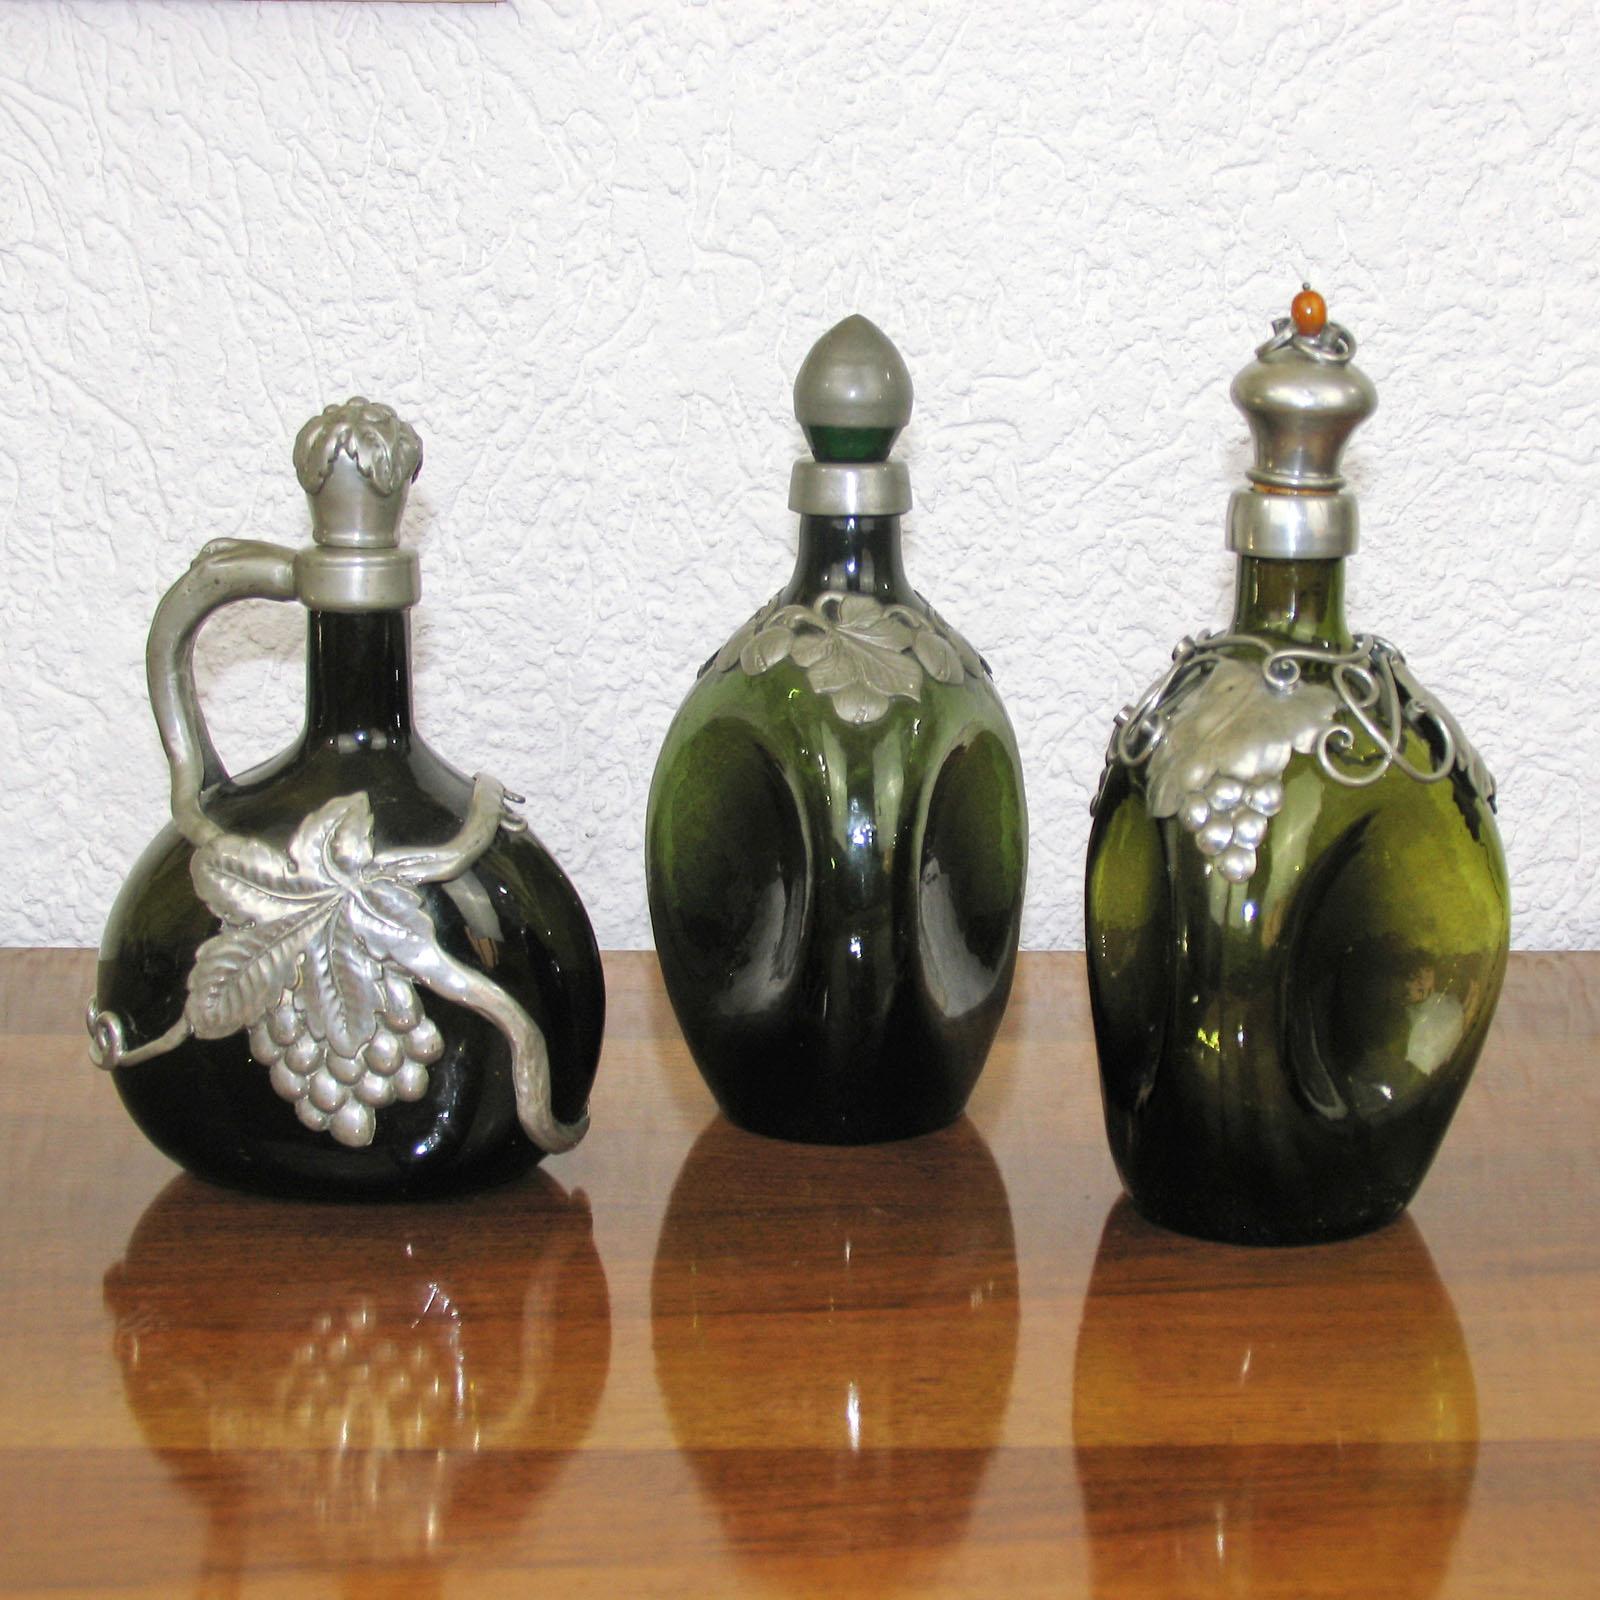 
Vintage decanter made of dark green glass decanter, with handle, stopper and embossed pewter overlay, wine and grapes decor. Very good used condition. After a design of Georg Nilsson.
Measure: Height 25 cm.

Triangular green glass bottle with